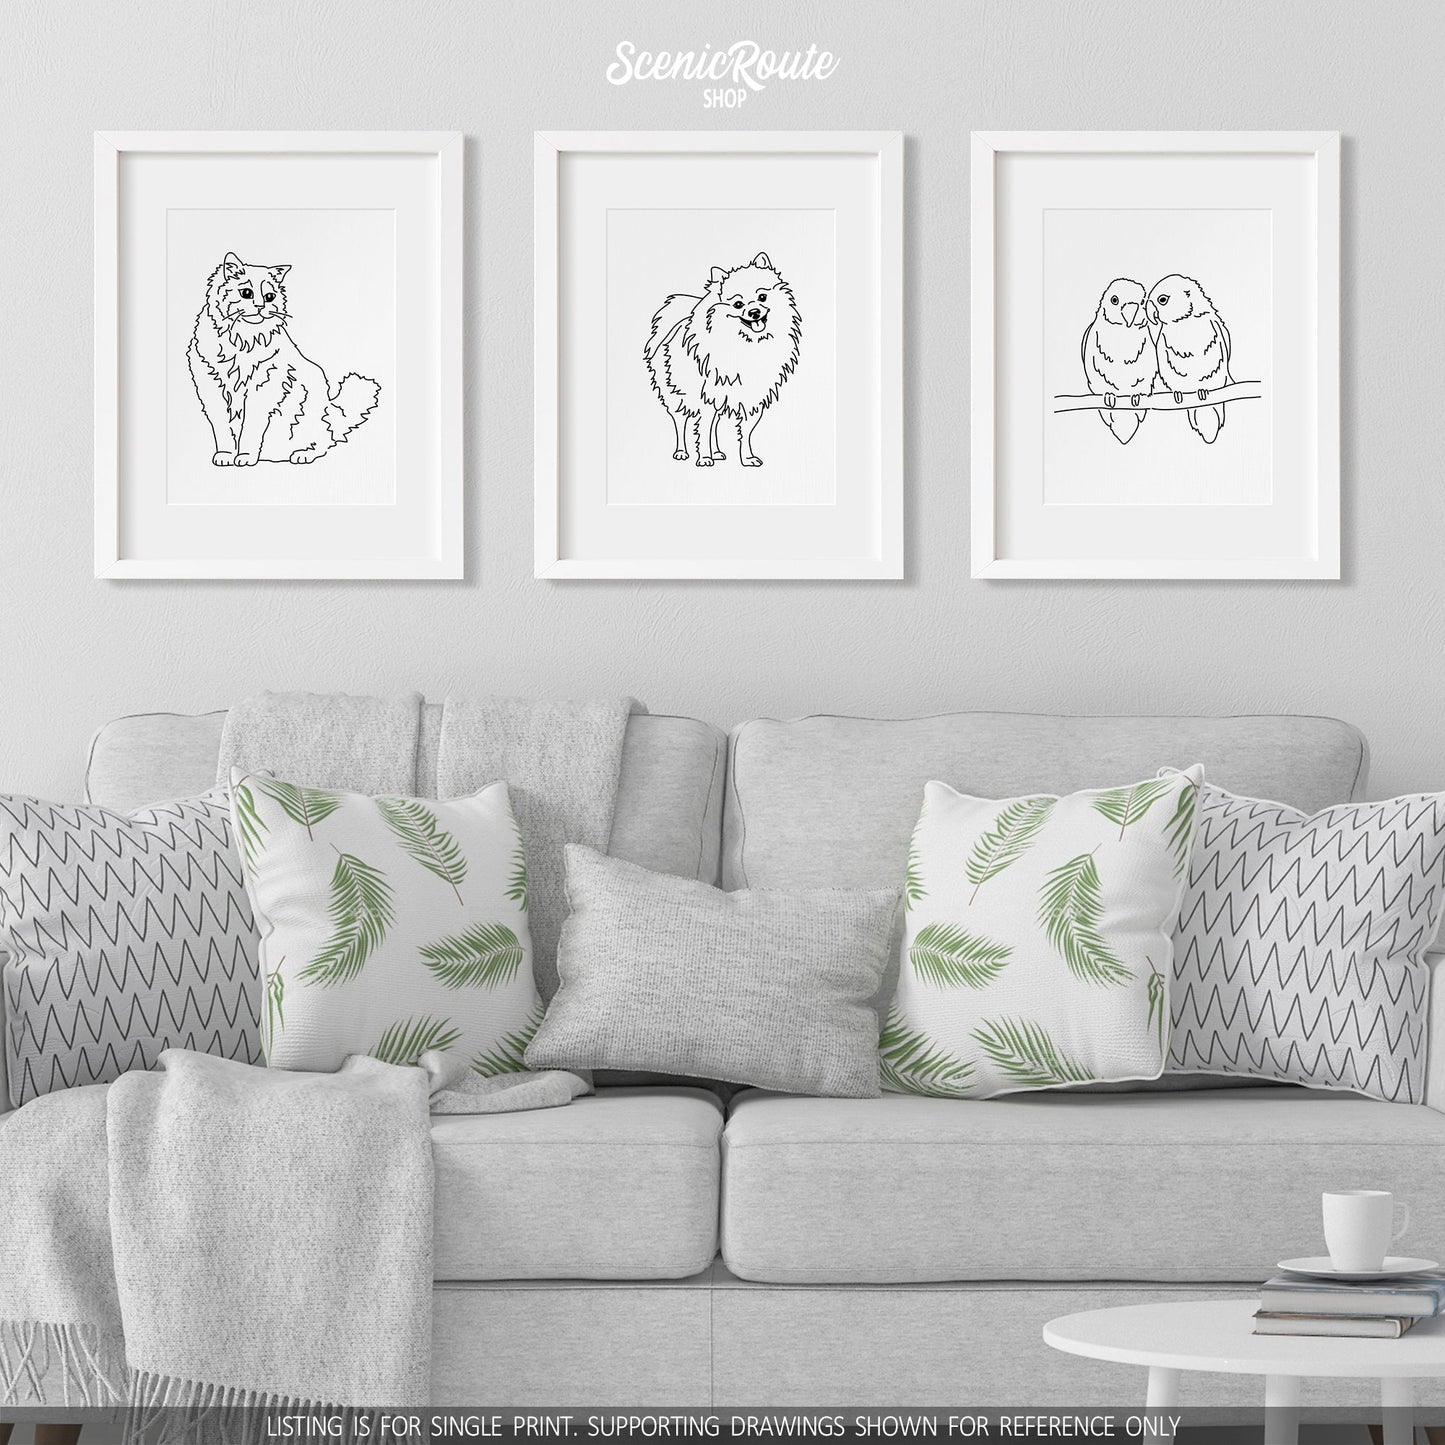 A group of three framed drawings on a white wall hanging above a couch with pillows and a blanket. The line art drawings include a Ragdoll cat, a Pomeranian Dog, and two Lovebirds